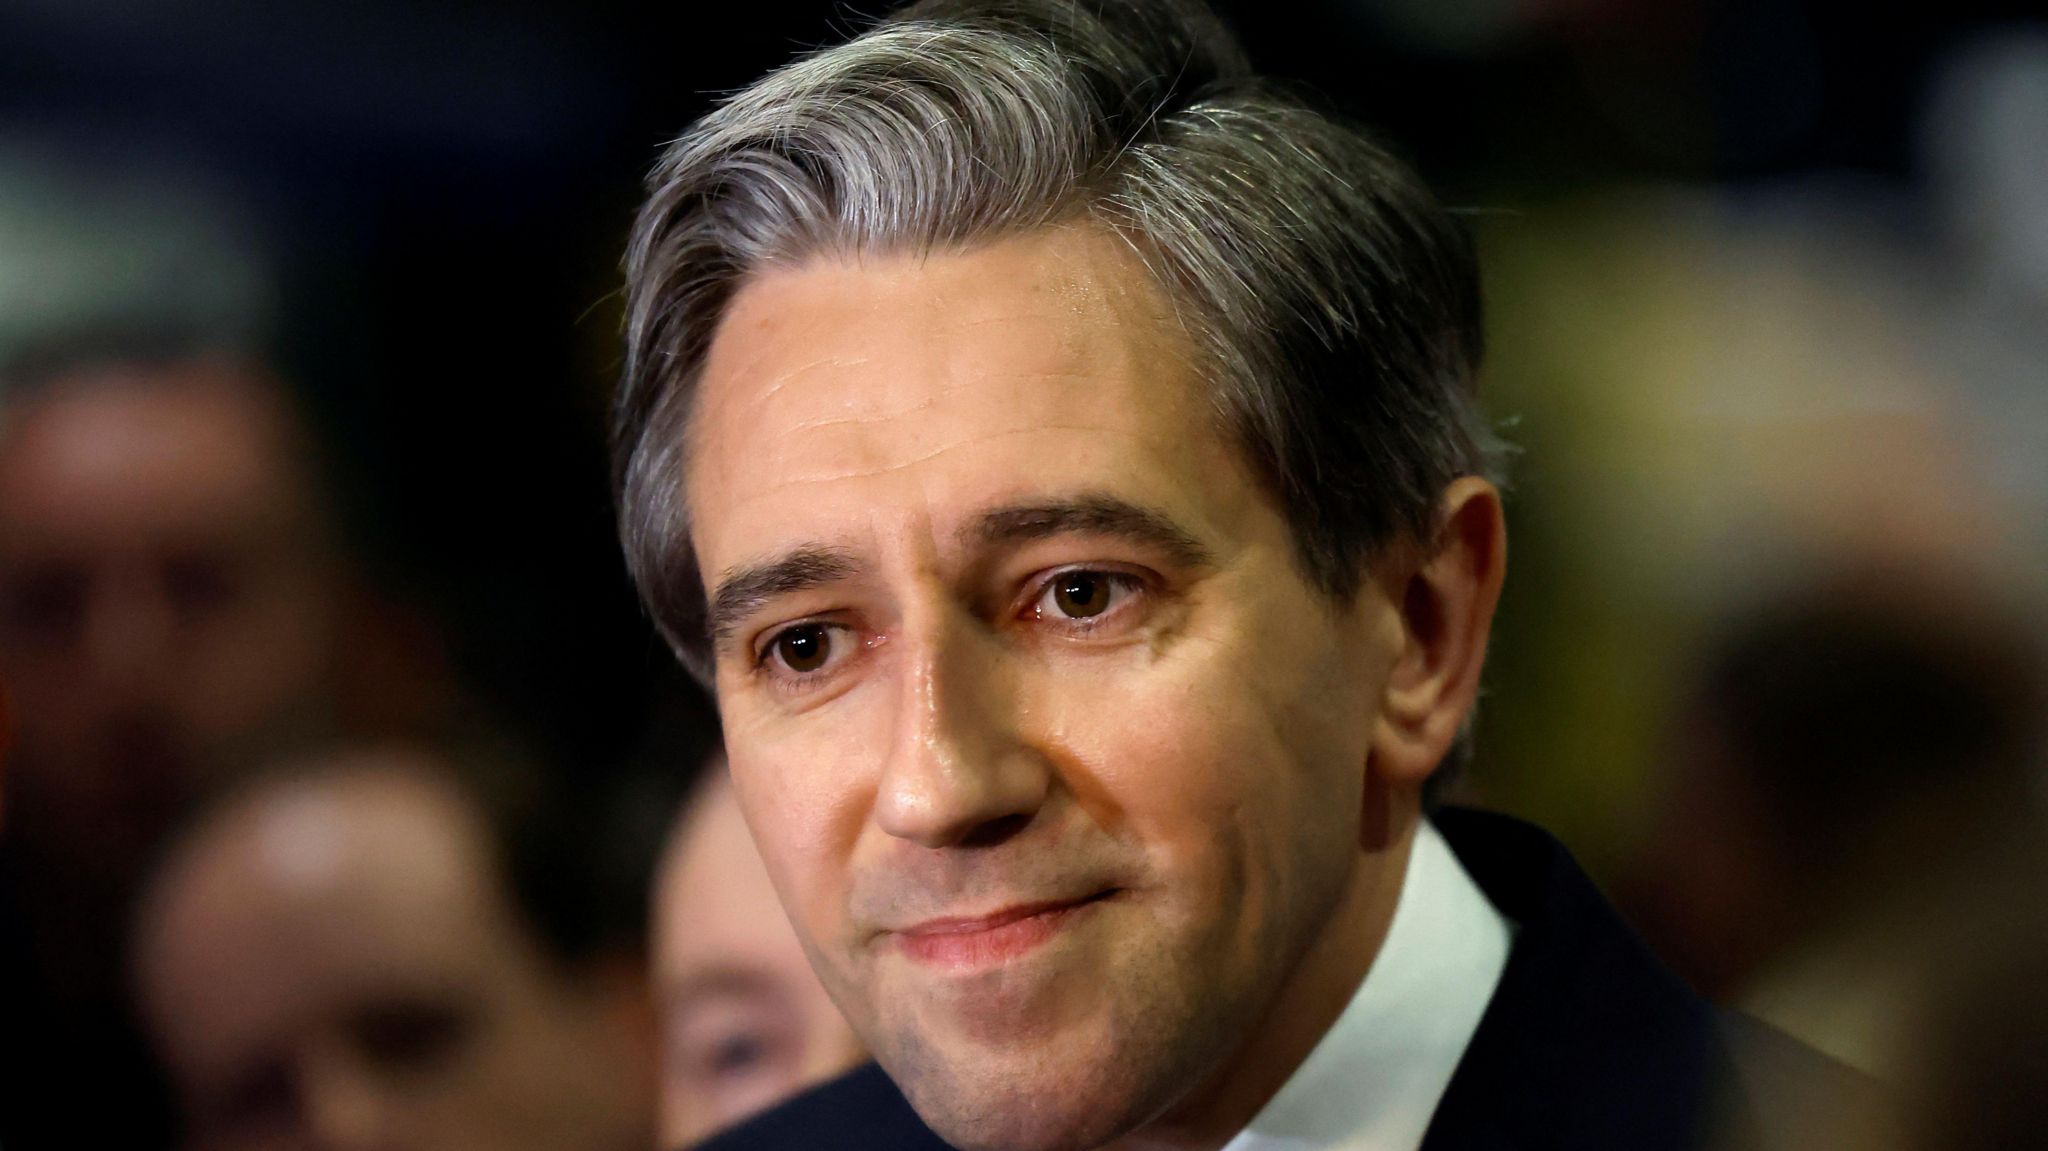 A close up image of Taoiseach Simon Harris speaking to the media in Dublin